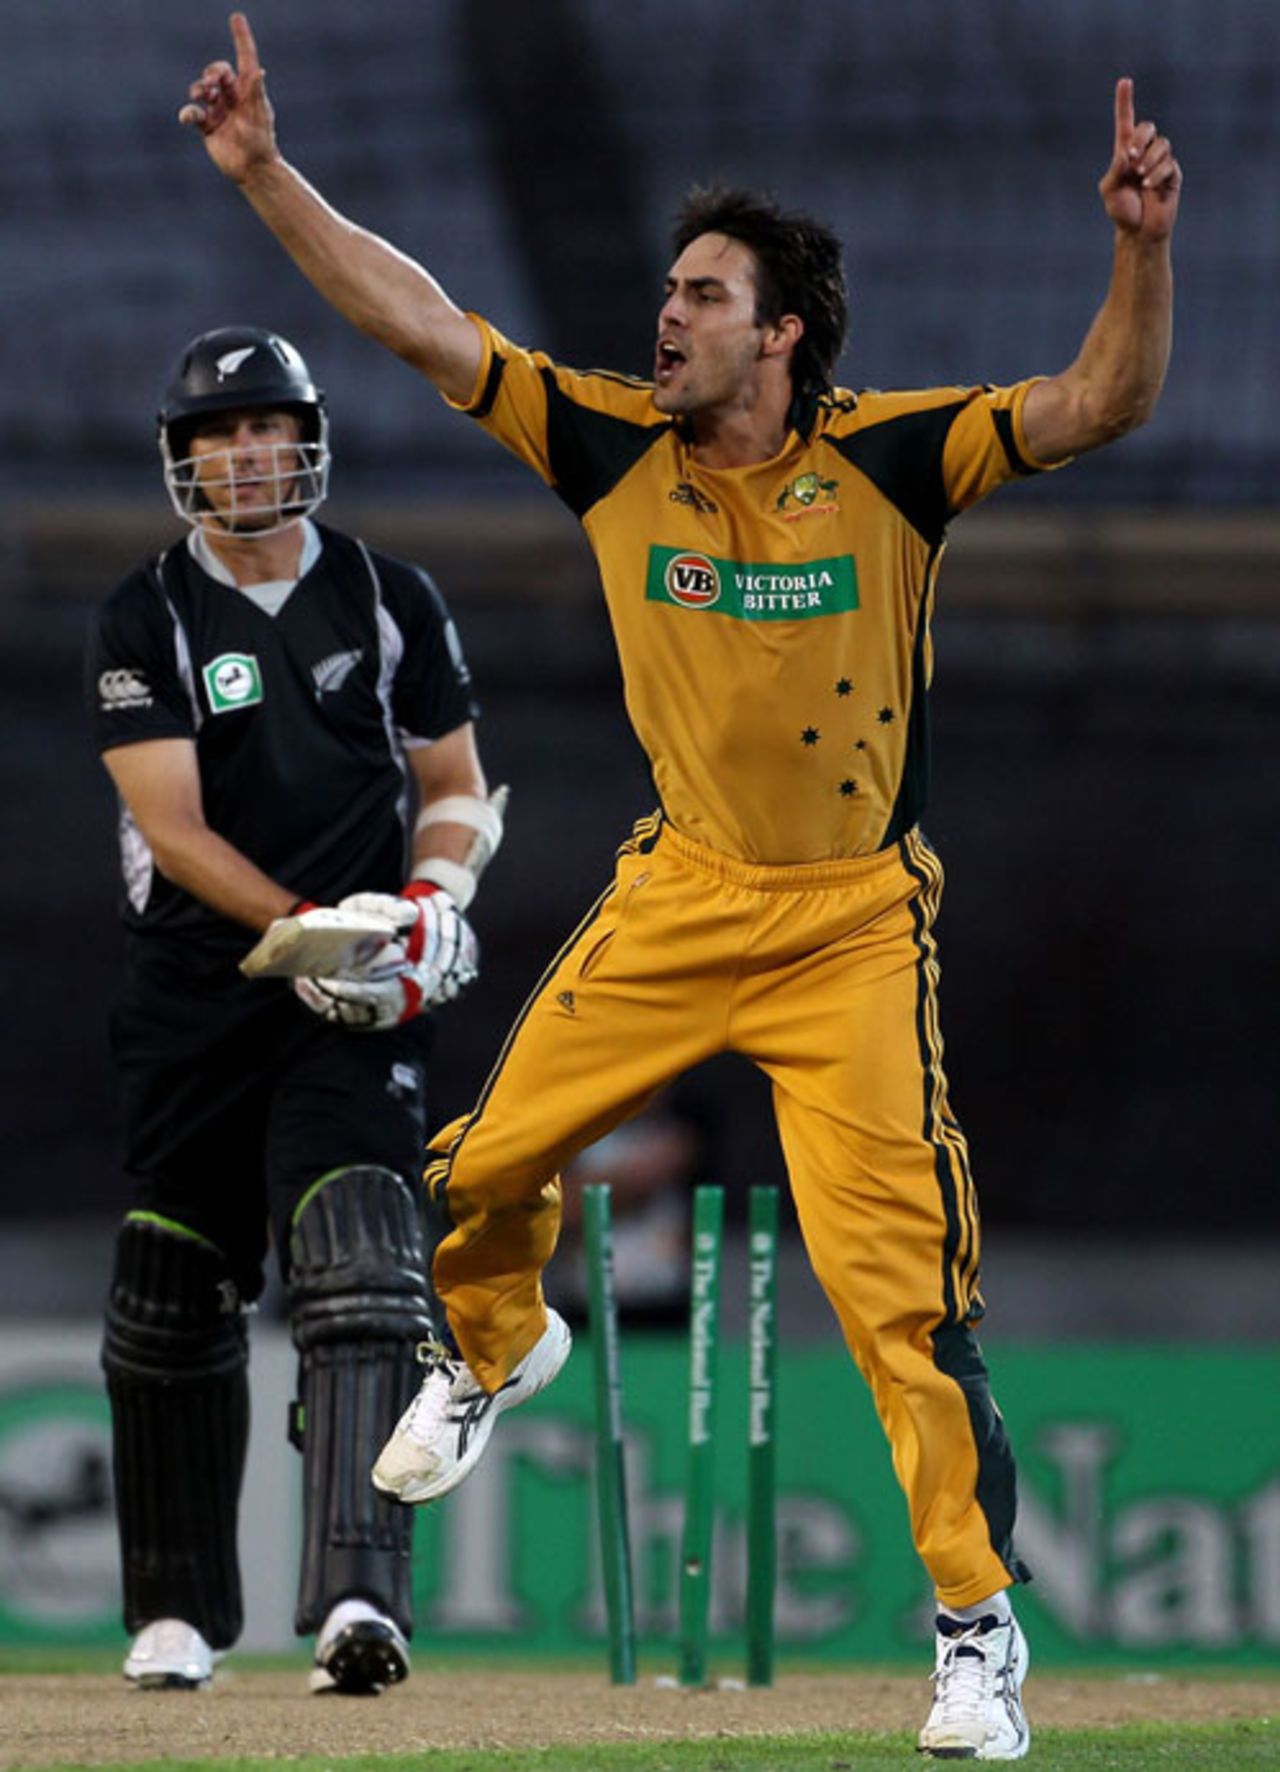 Mitchell Johnson is excited after bowling Shane Bond, New Zealand v Australia, 2nd ODI, Auckland, March 6, 2010